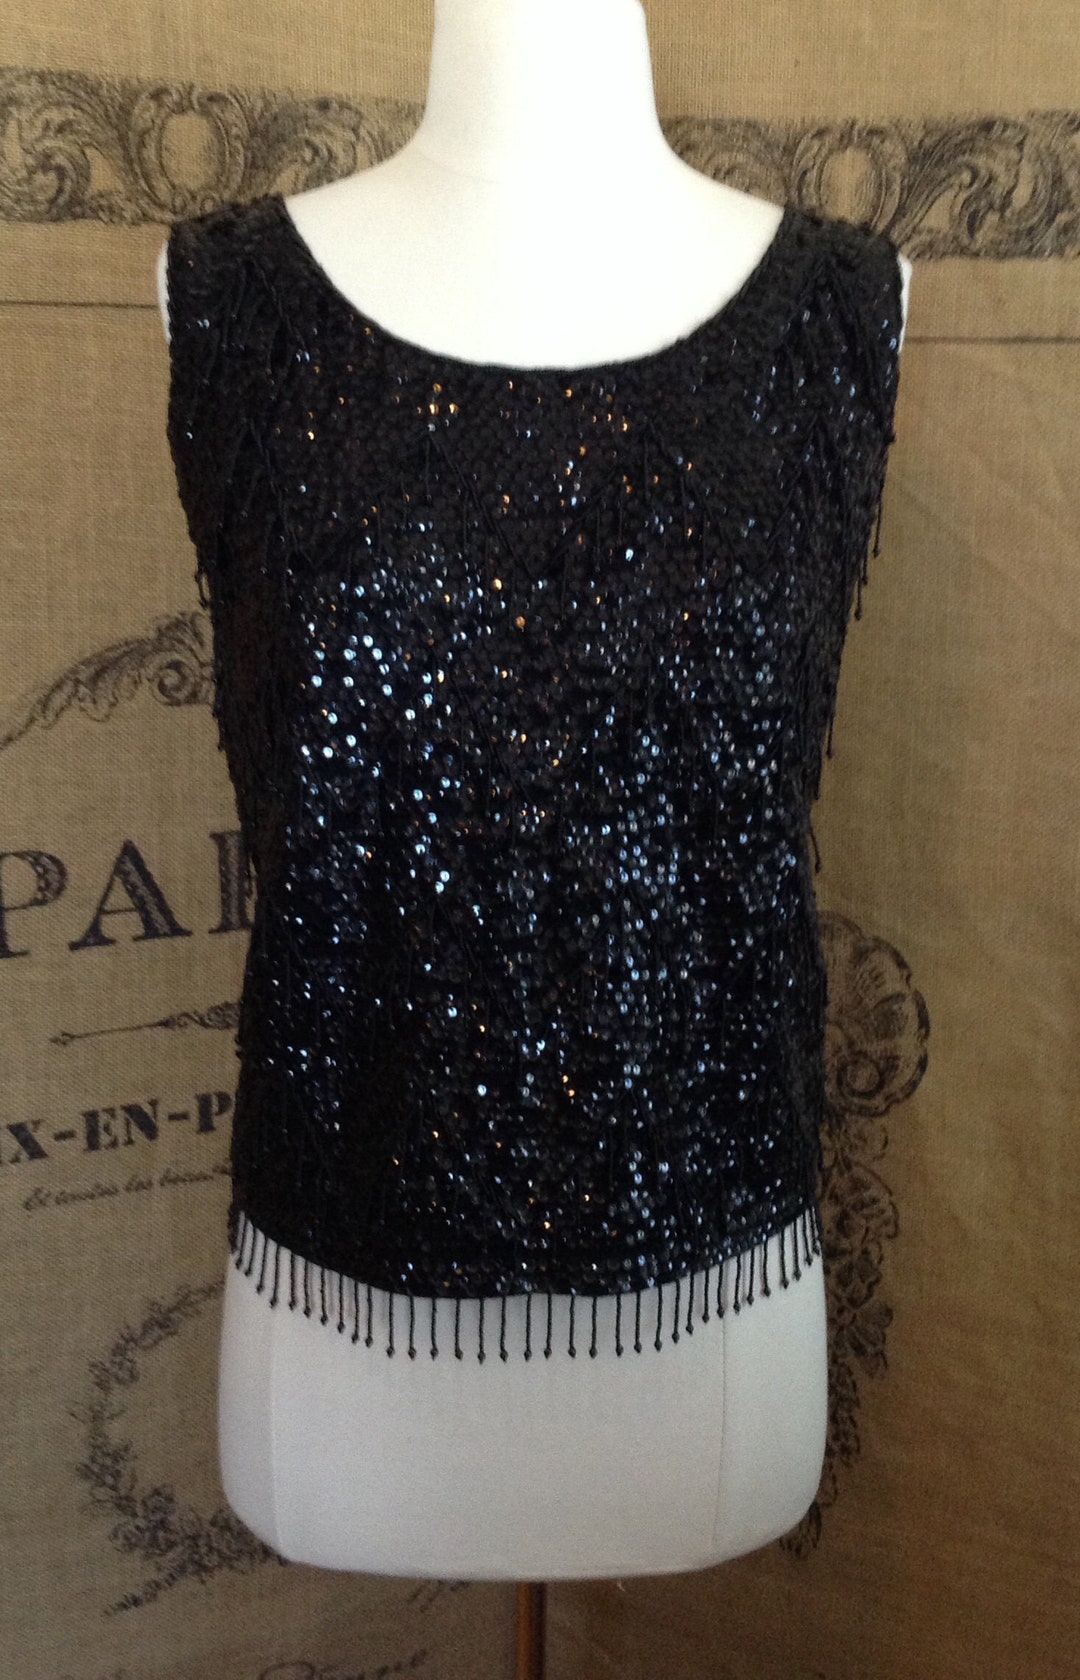 Vintage Black Beaded Top 1960's Fringed Top Sequin - Etsy